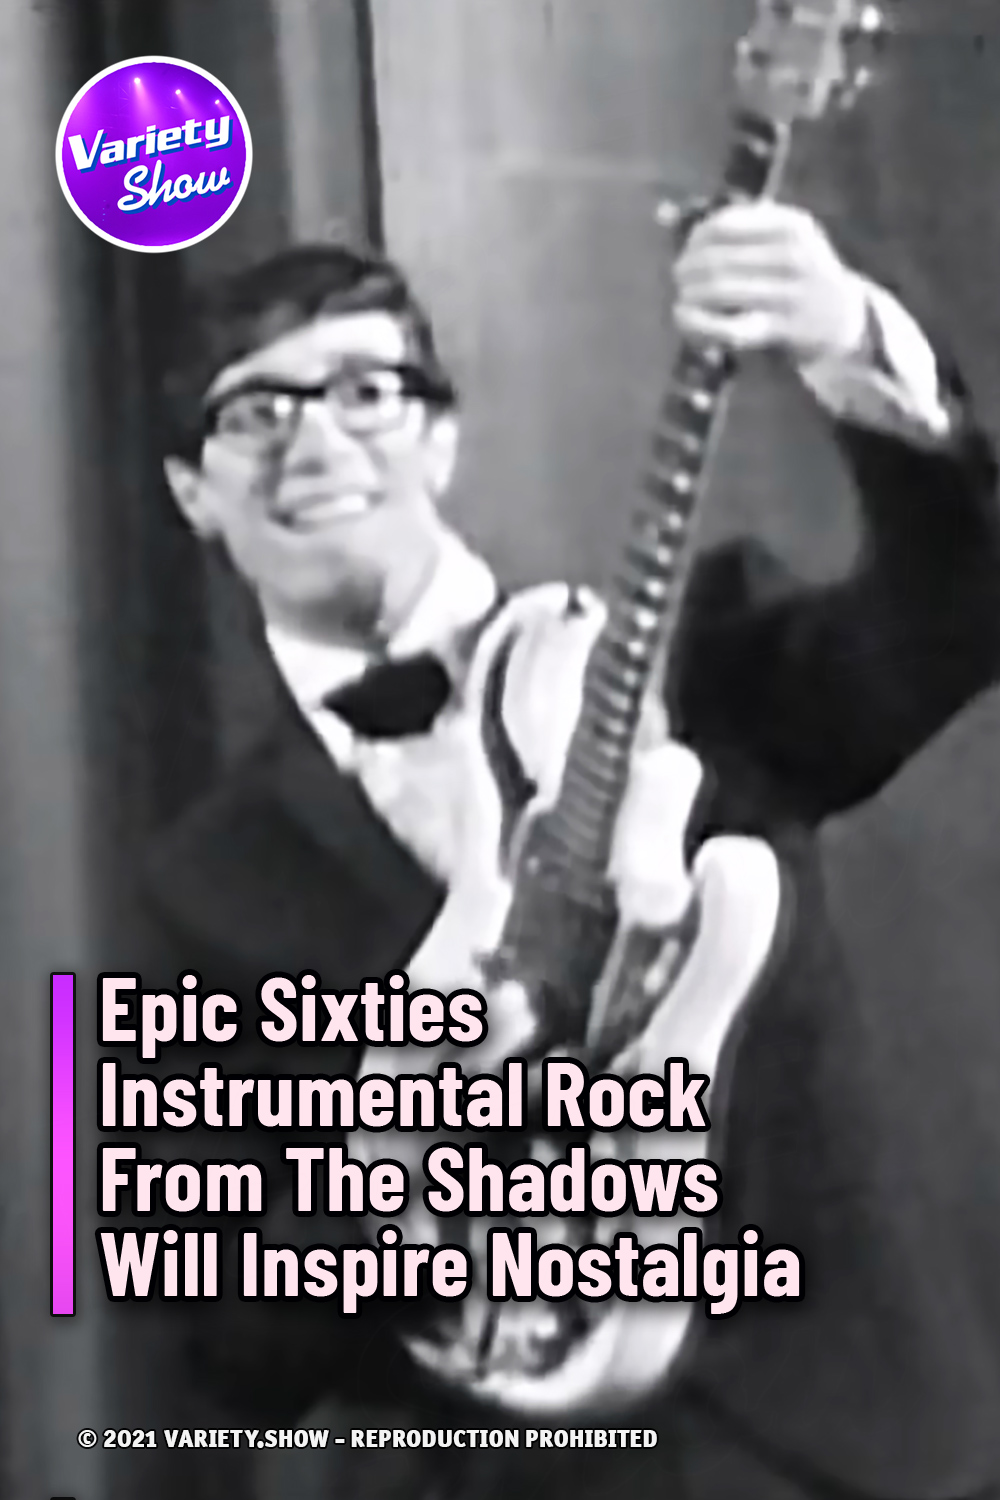 Epic Sixties Instrumental Rock From The Shadows Will Inspire Nostalgia